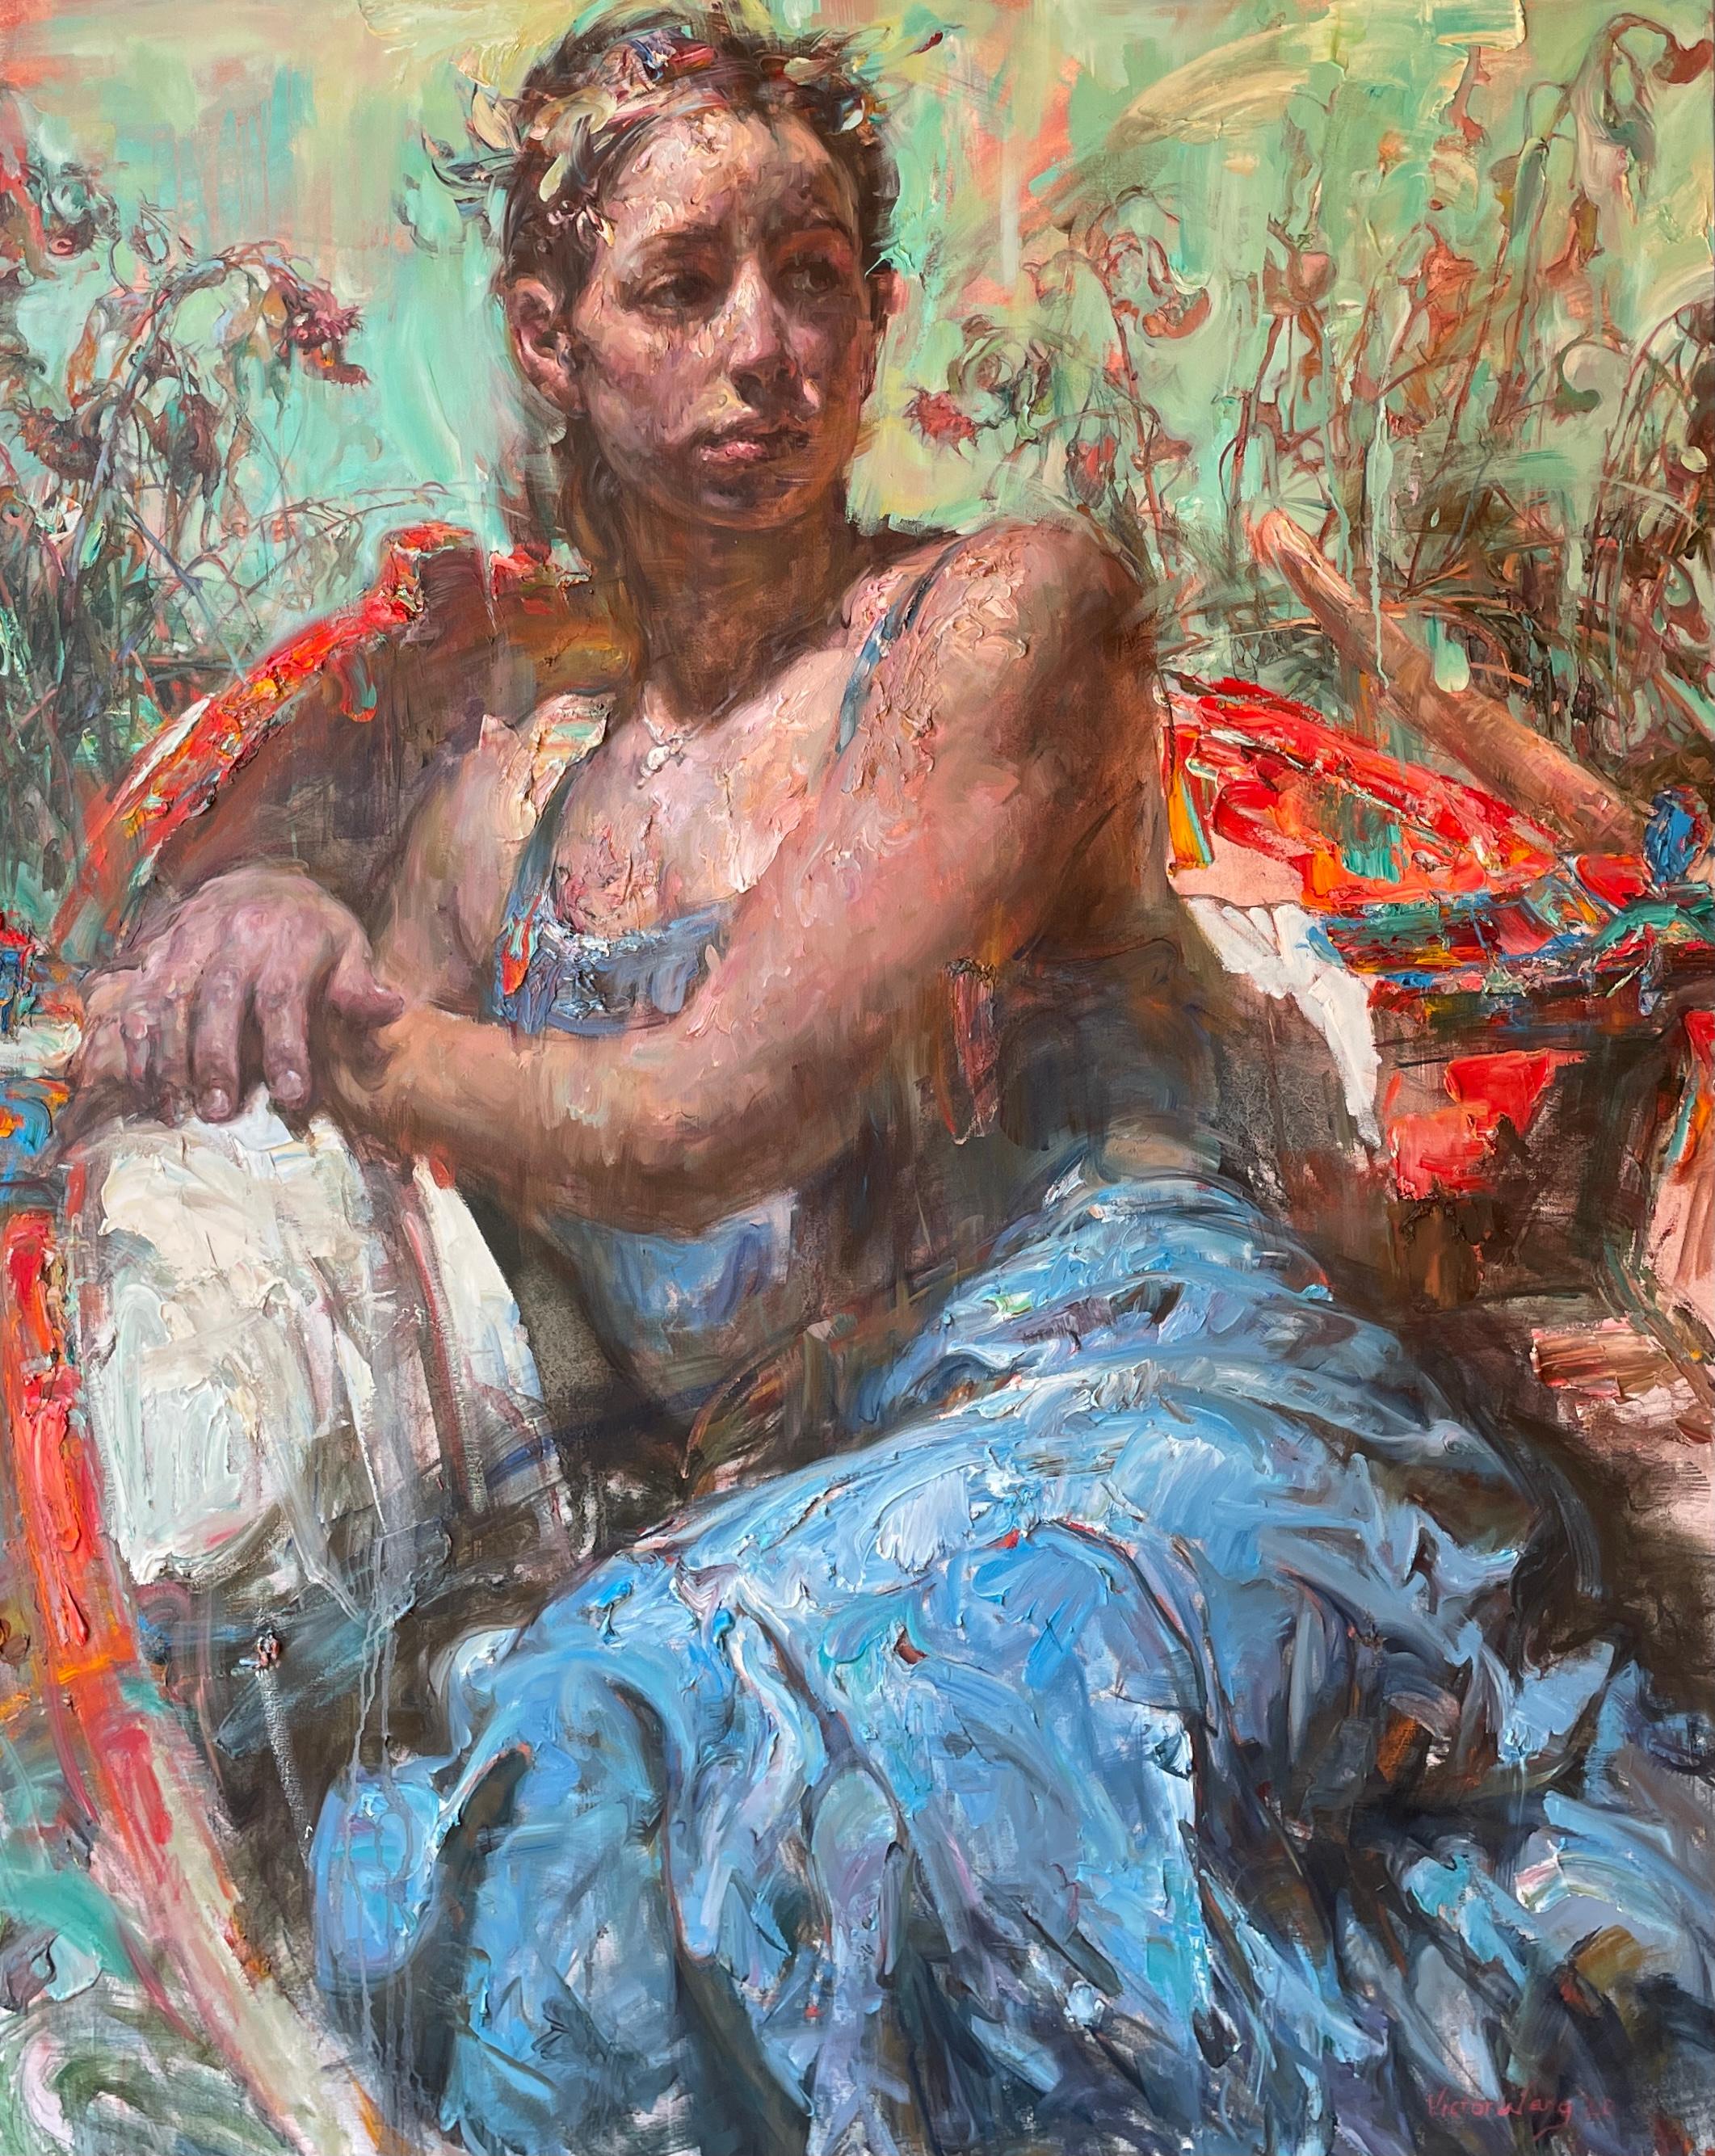 Red Boat - Woman in a Blue Dress Reclining in Boat, Highly Textural Oil Painting